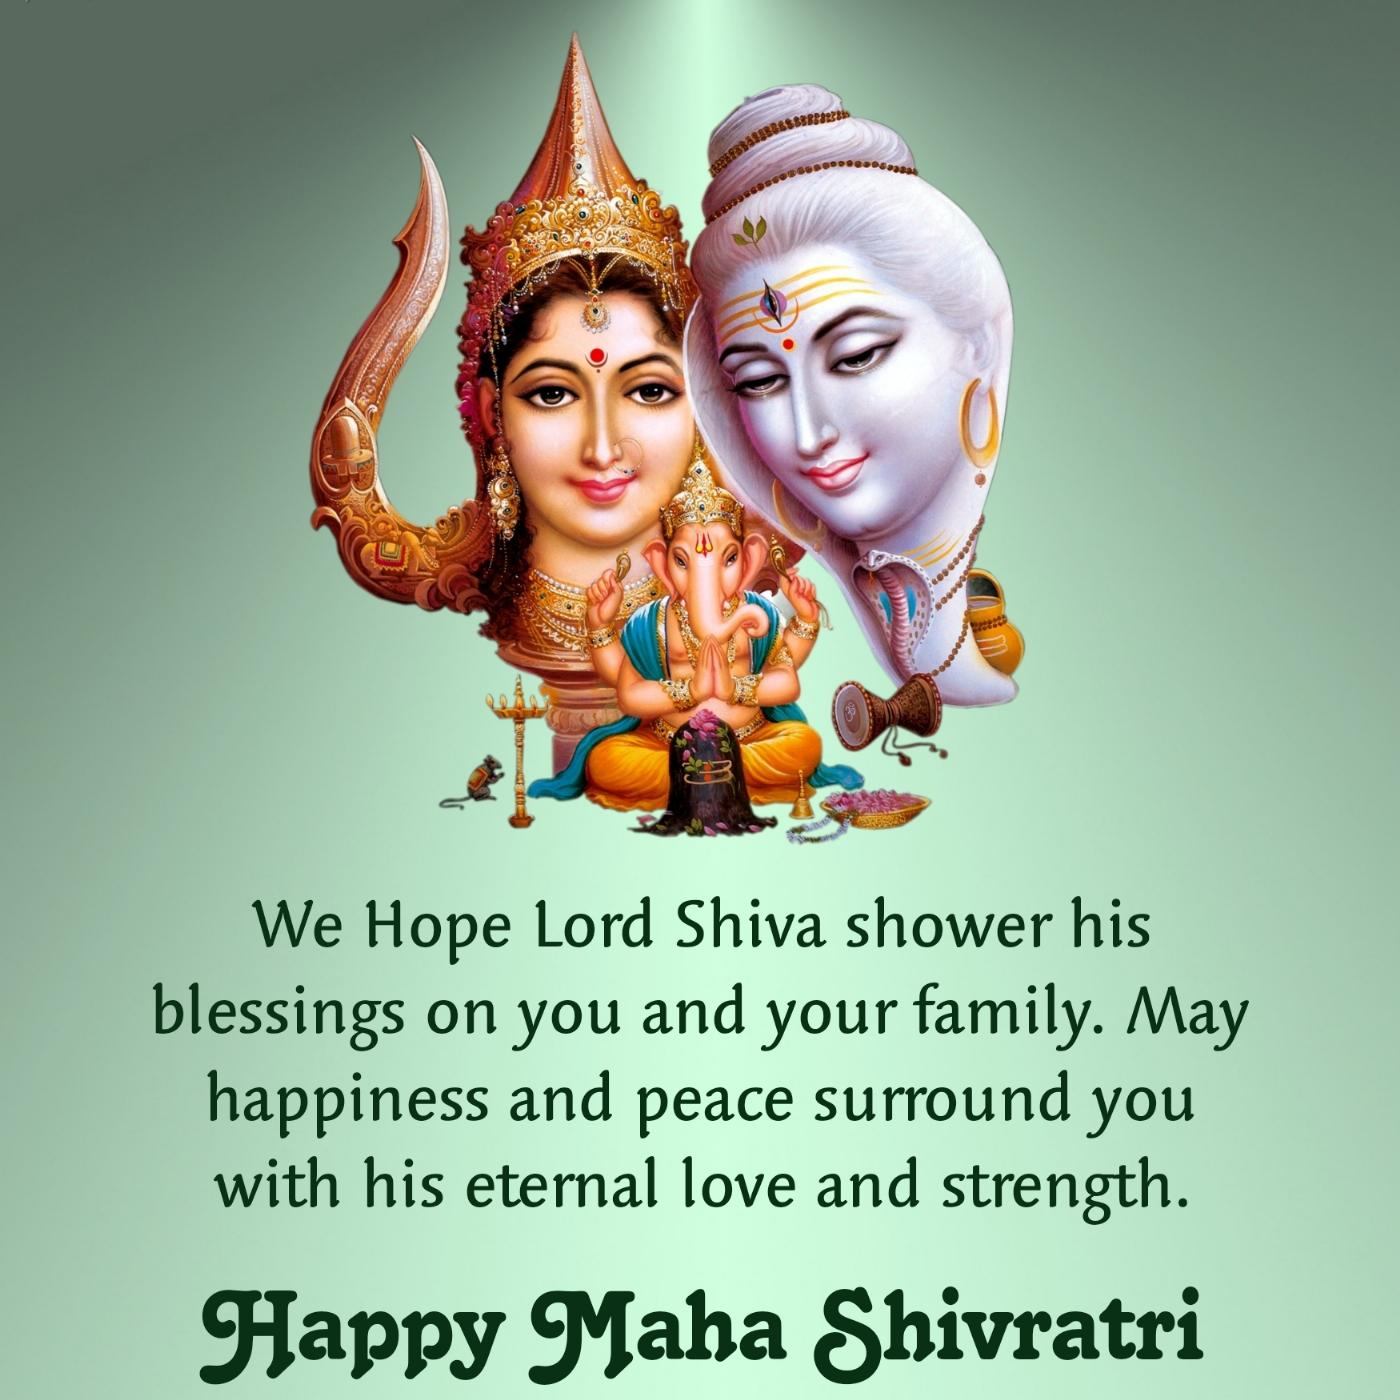 We Hope Lord Shiva shower his blessings on you and your family